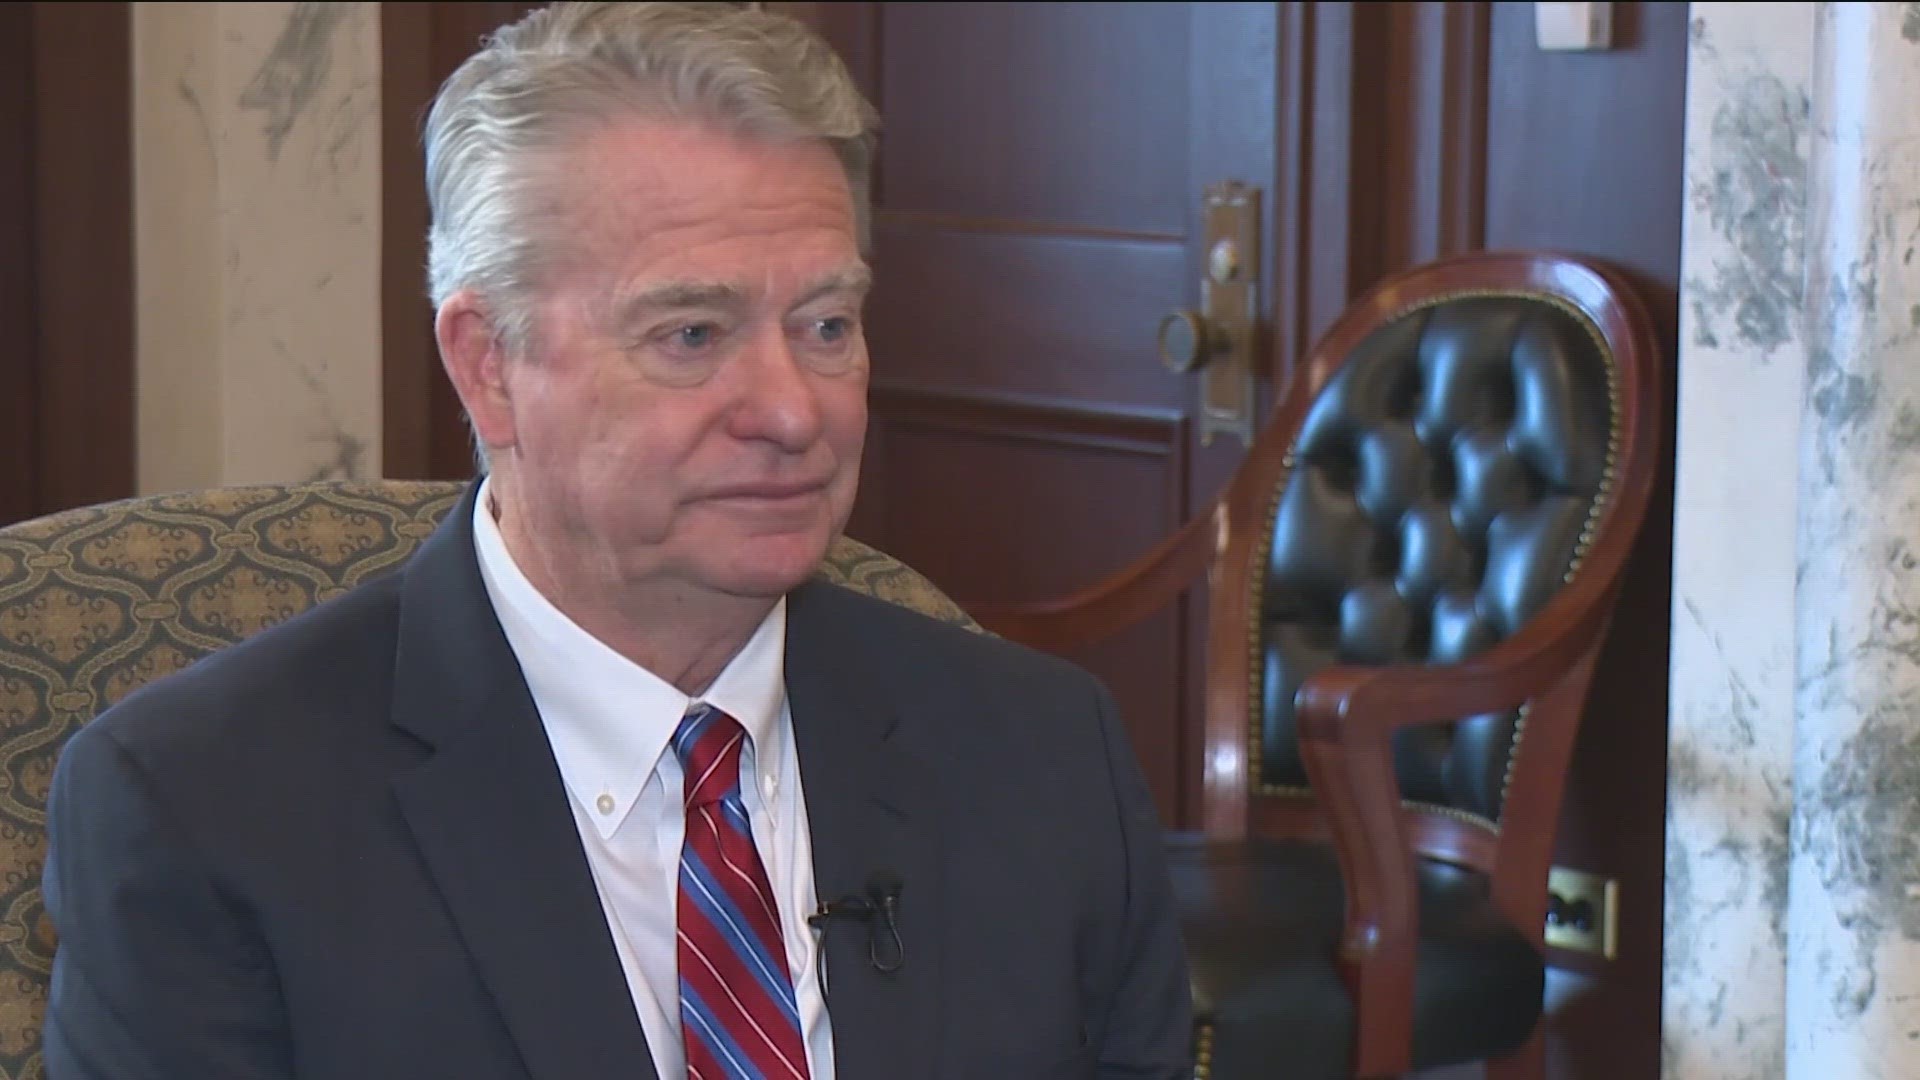 The 208 sits down with Gov. Little for an extended interview on major Idaho topics. The full 20-minute conversation will air Sunday on Viewpoint at 9 a.m.